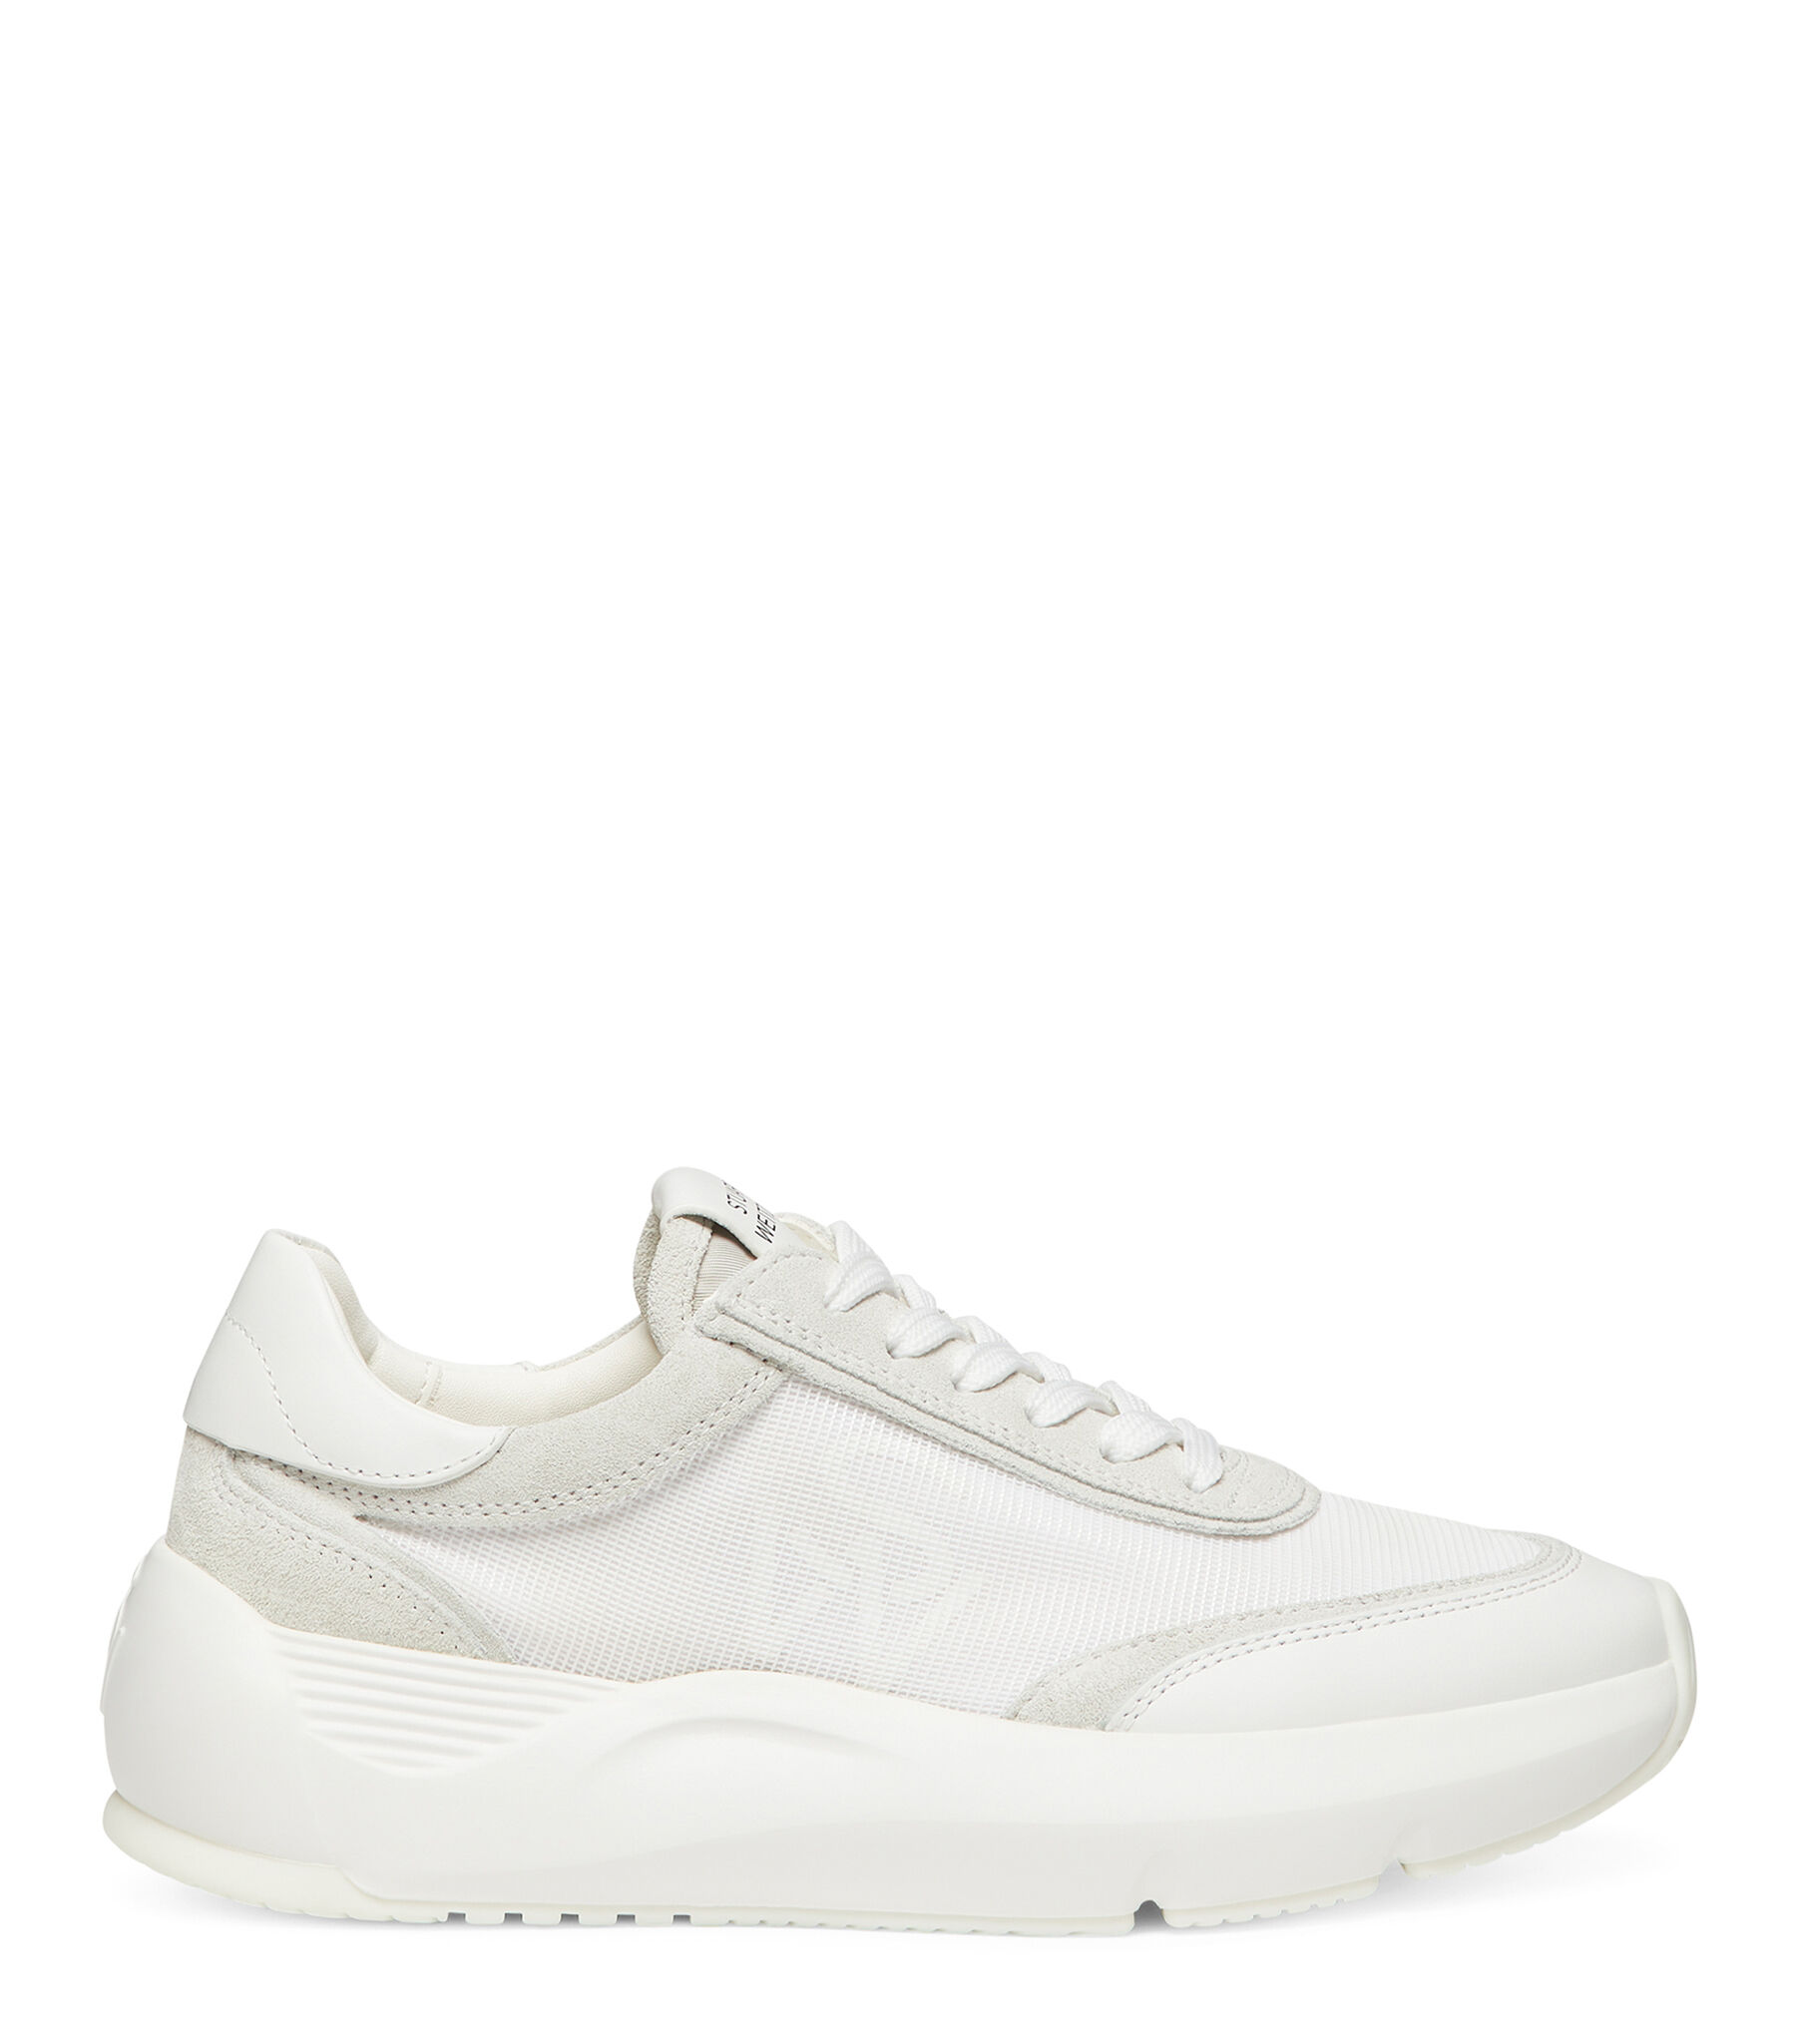 Stuart Weitzman Sw Glide Lace-up Sneaker - Donna Sneakers White 38